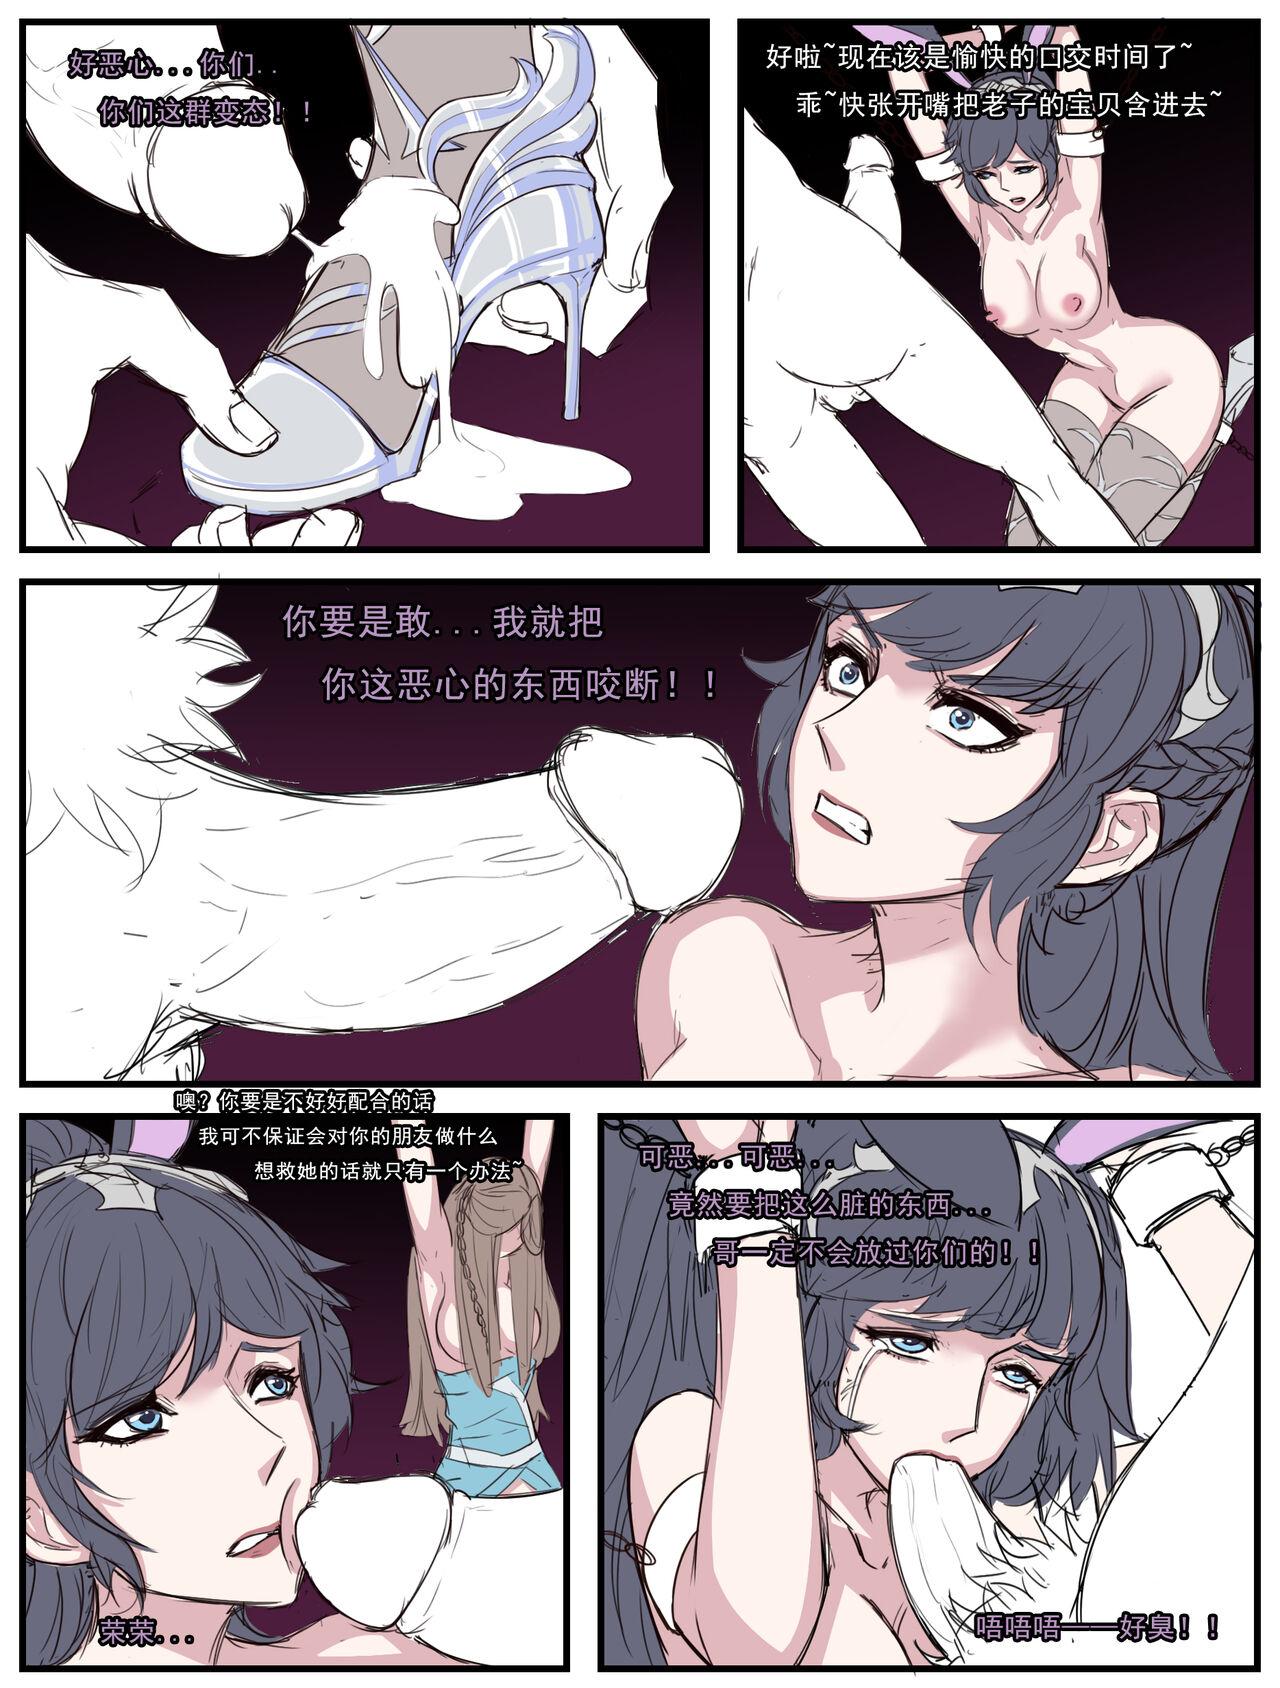 Naked Sex 斗罗双凤篇（15P，36） - Douluo continent Bra - Page 5